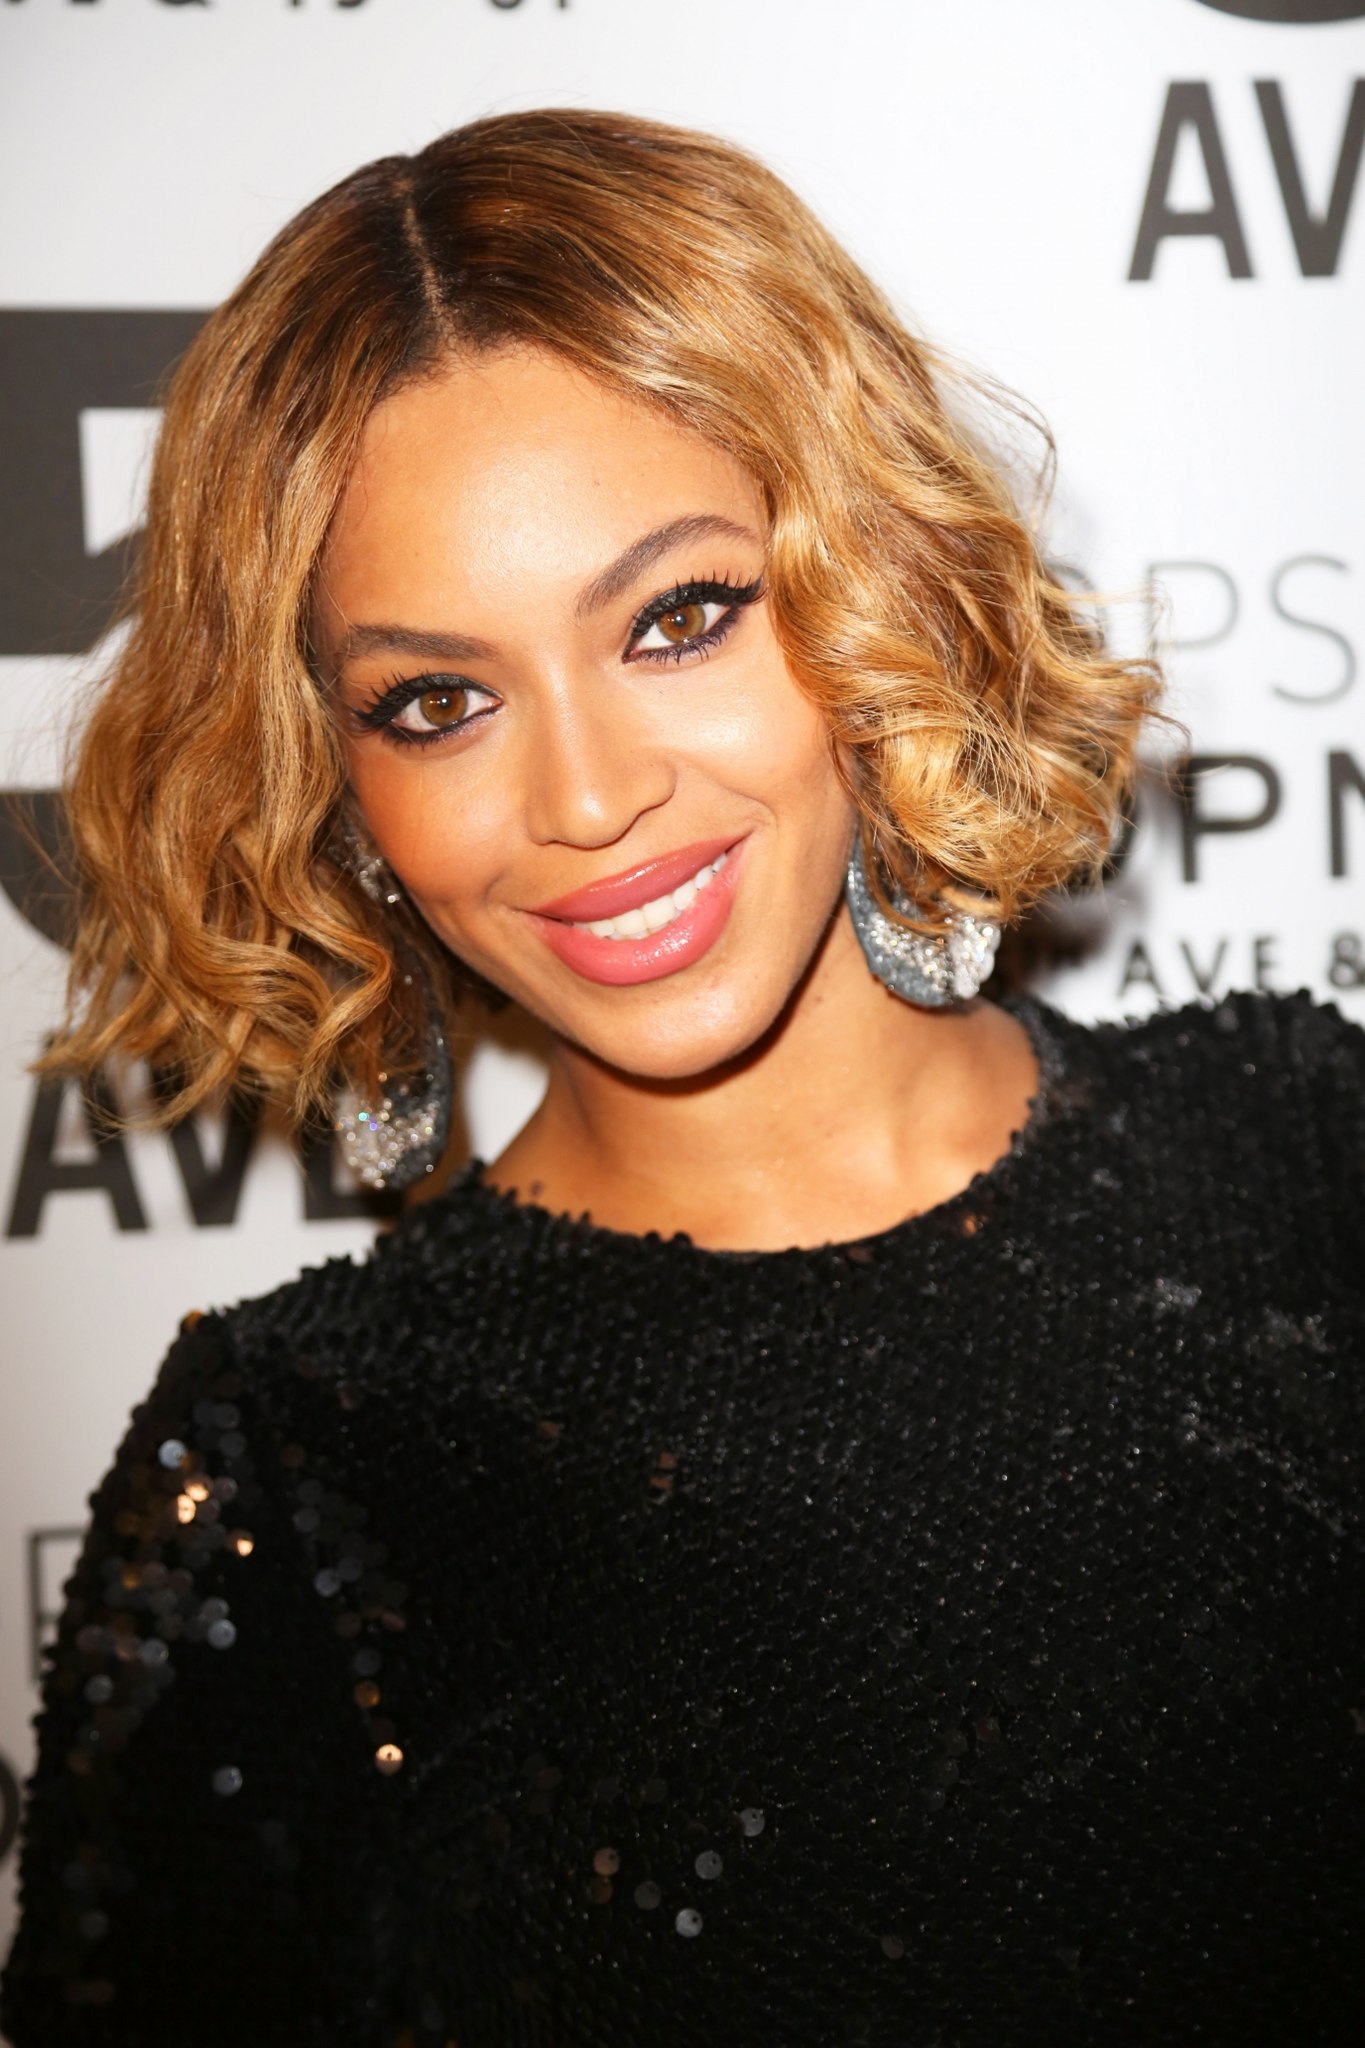 Beyonce Knowles photo 5233 of 7869 pics, wallpaper - photo #740358 ...